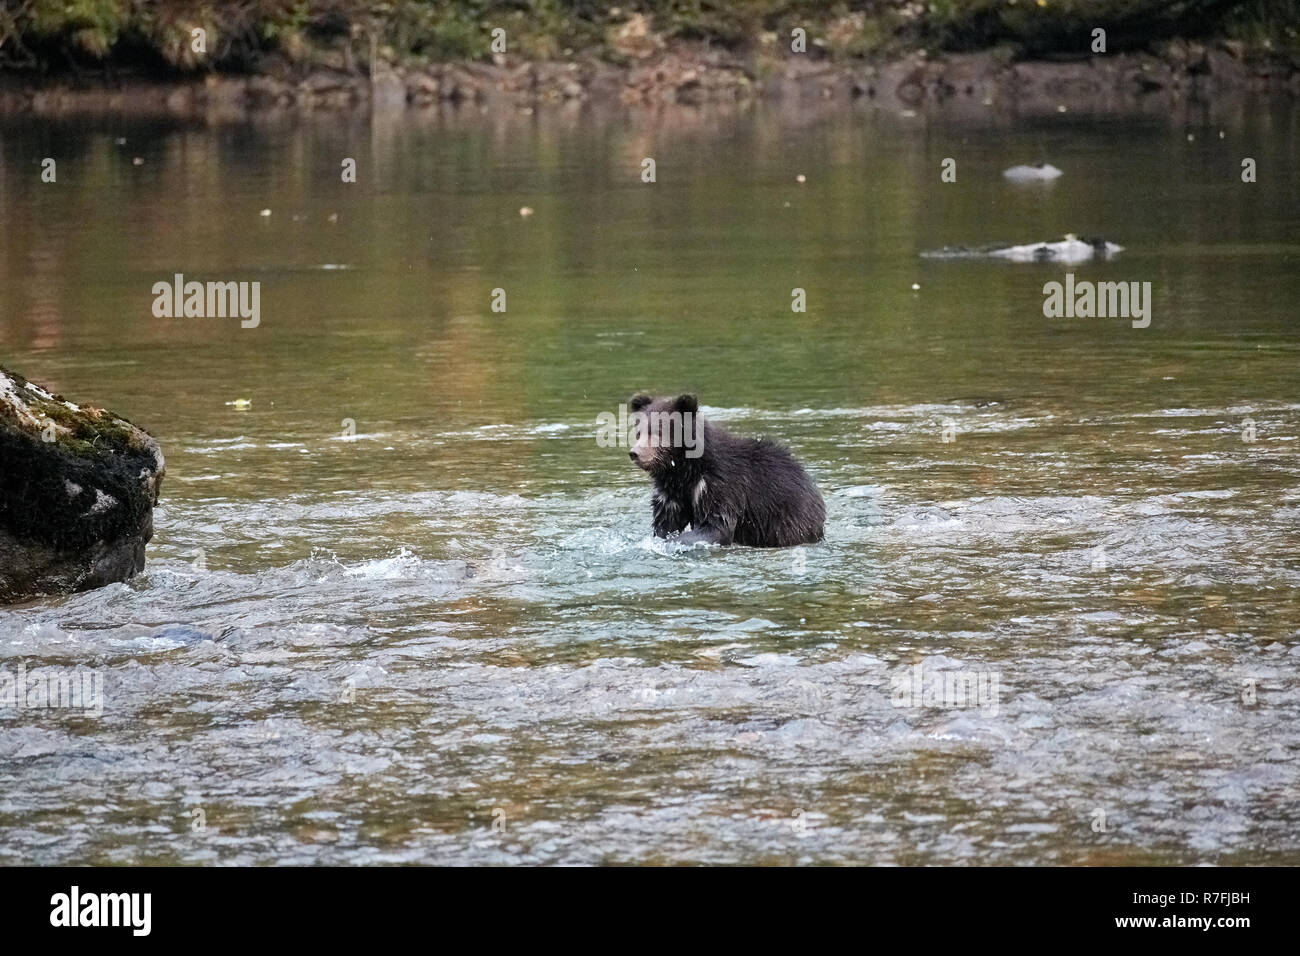 Grizzly bear cub trying to catch salmon, Great Bear Rainforest, Canada Stock Photo